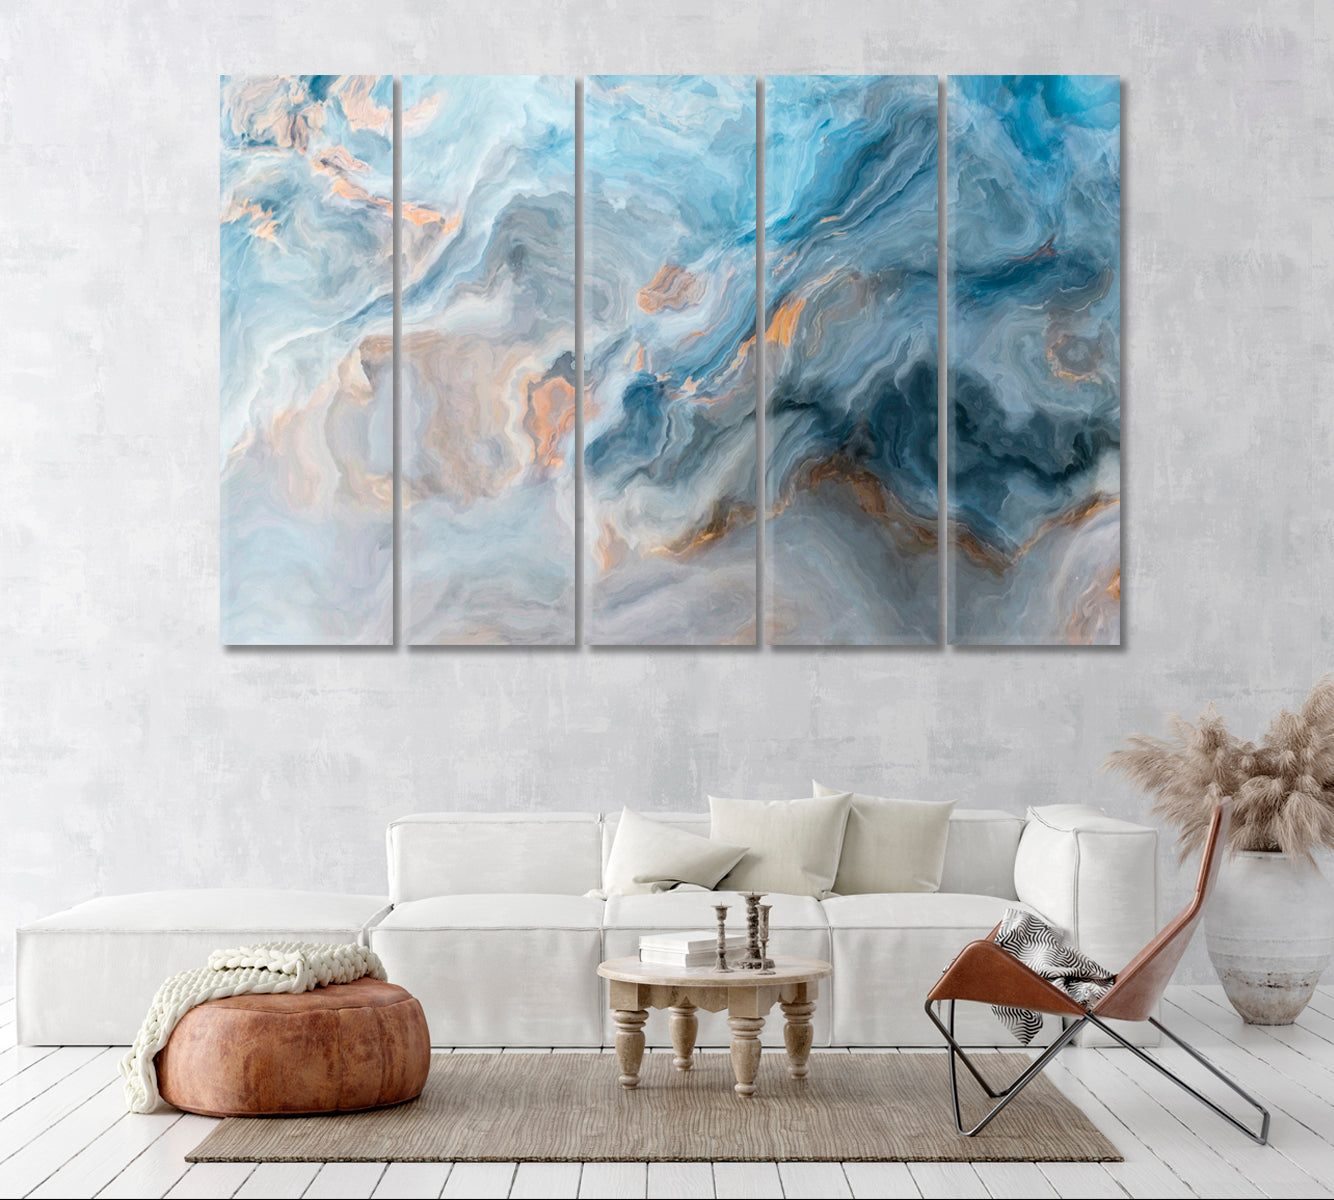 Blue Marble Wavy Pattern Canvas Print ArtLexy 5 Panels 36"x24" inches 